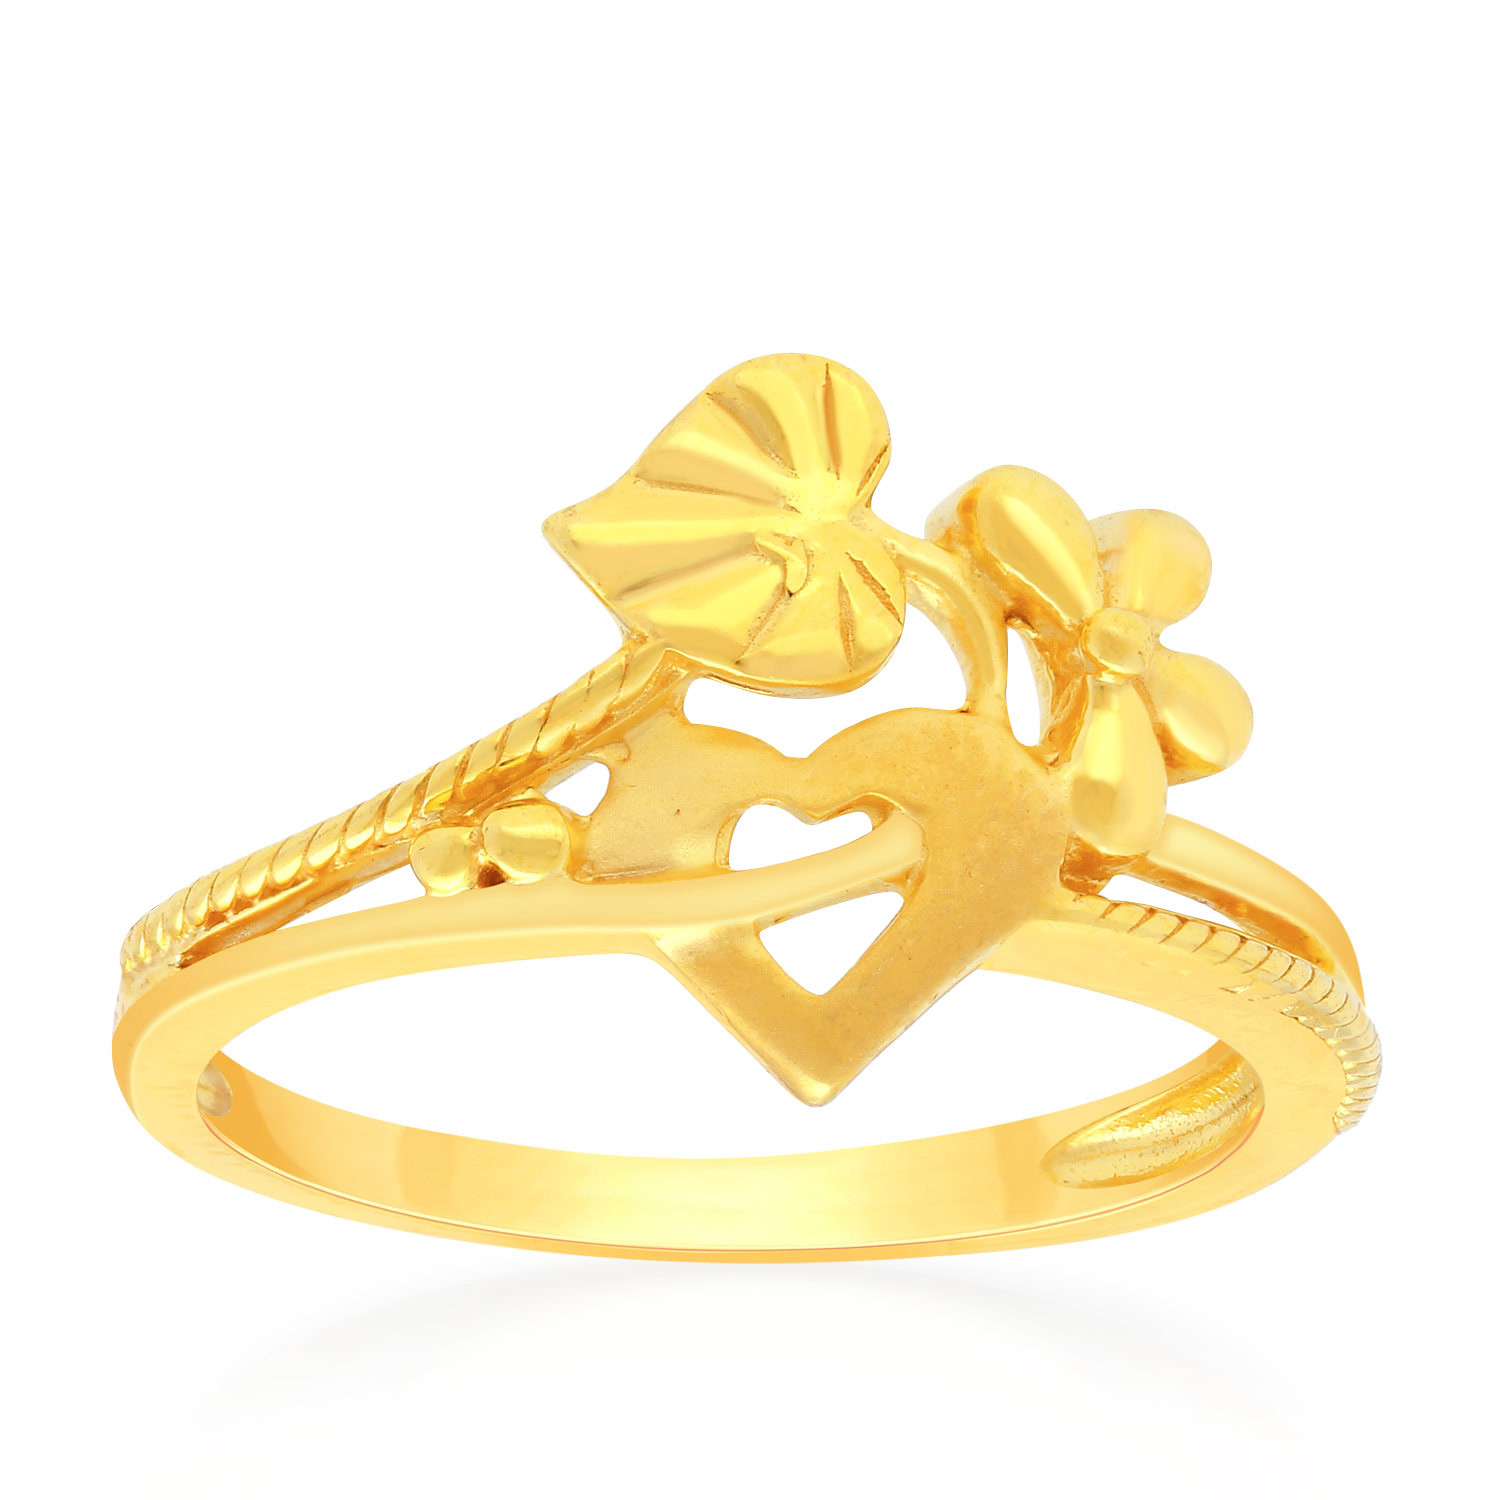 Gold Rings For Women | Gold ring designs, Gold rings jewelry, White gold  jewelry